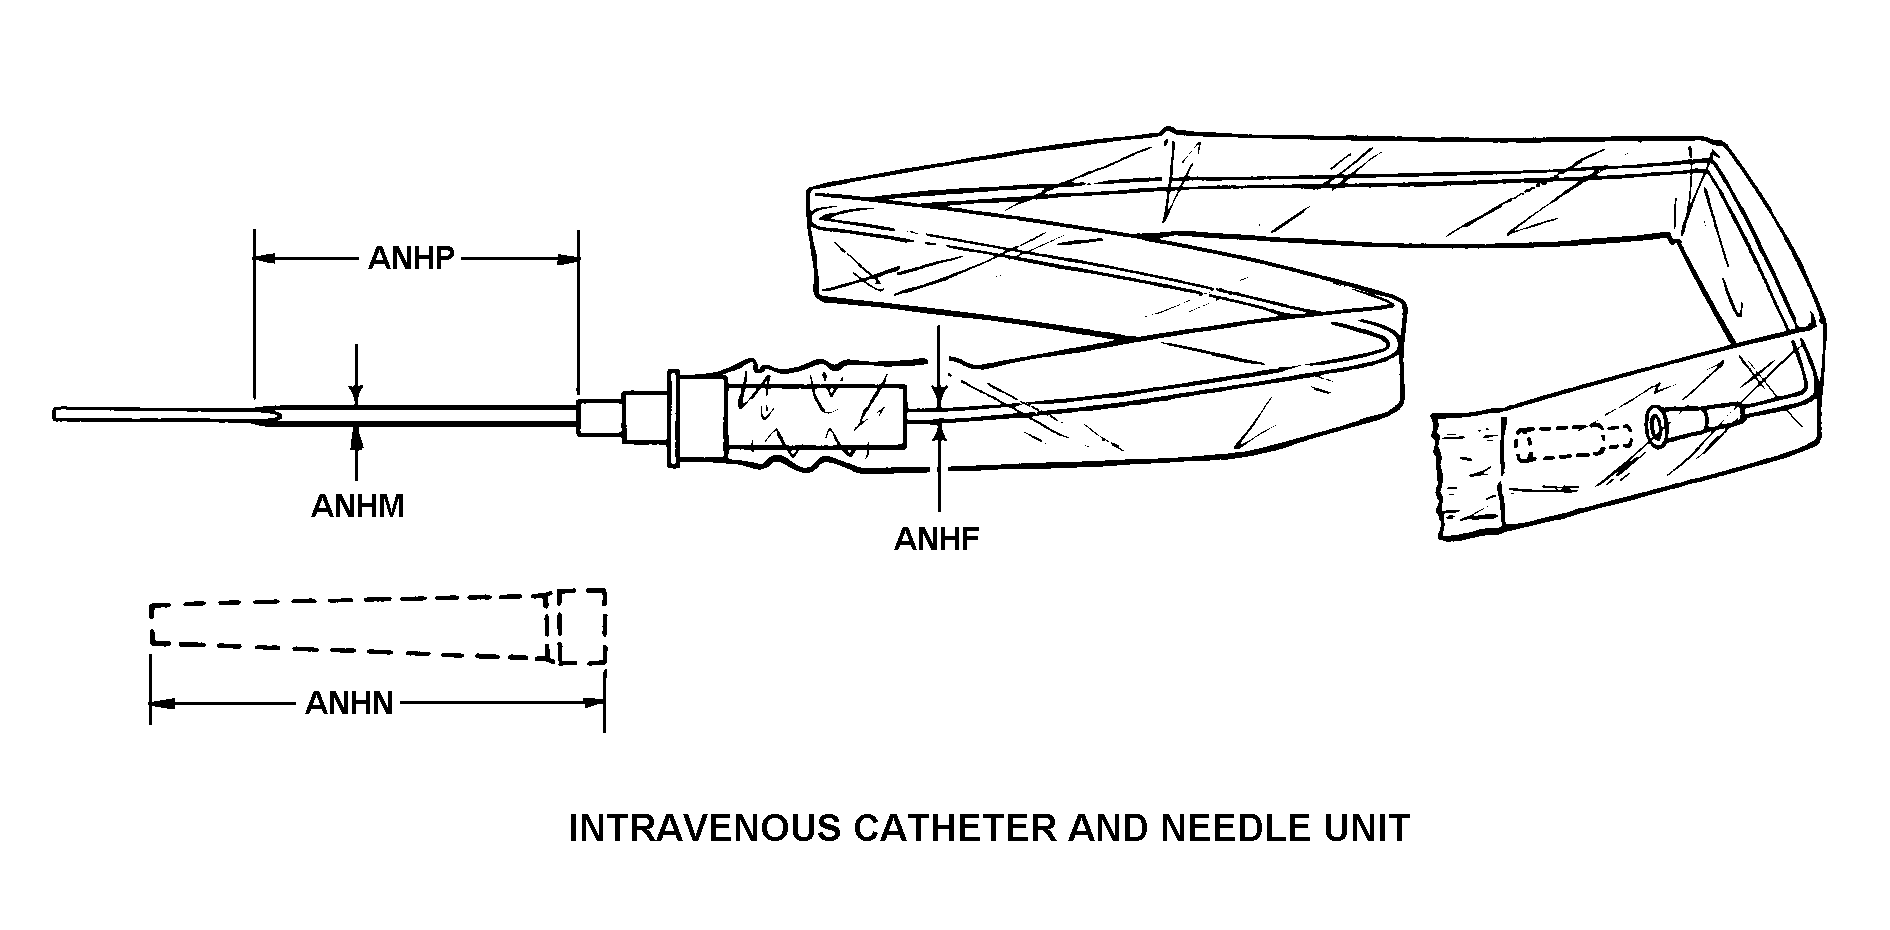 INTRAVENOUS CATHETER AND NEEDLE UNIT style nsn 6515-01-209-1174